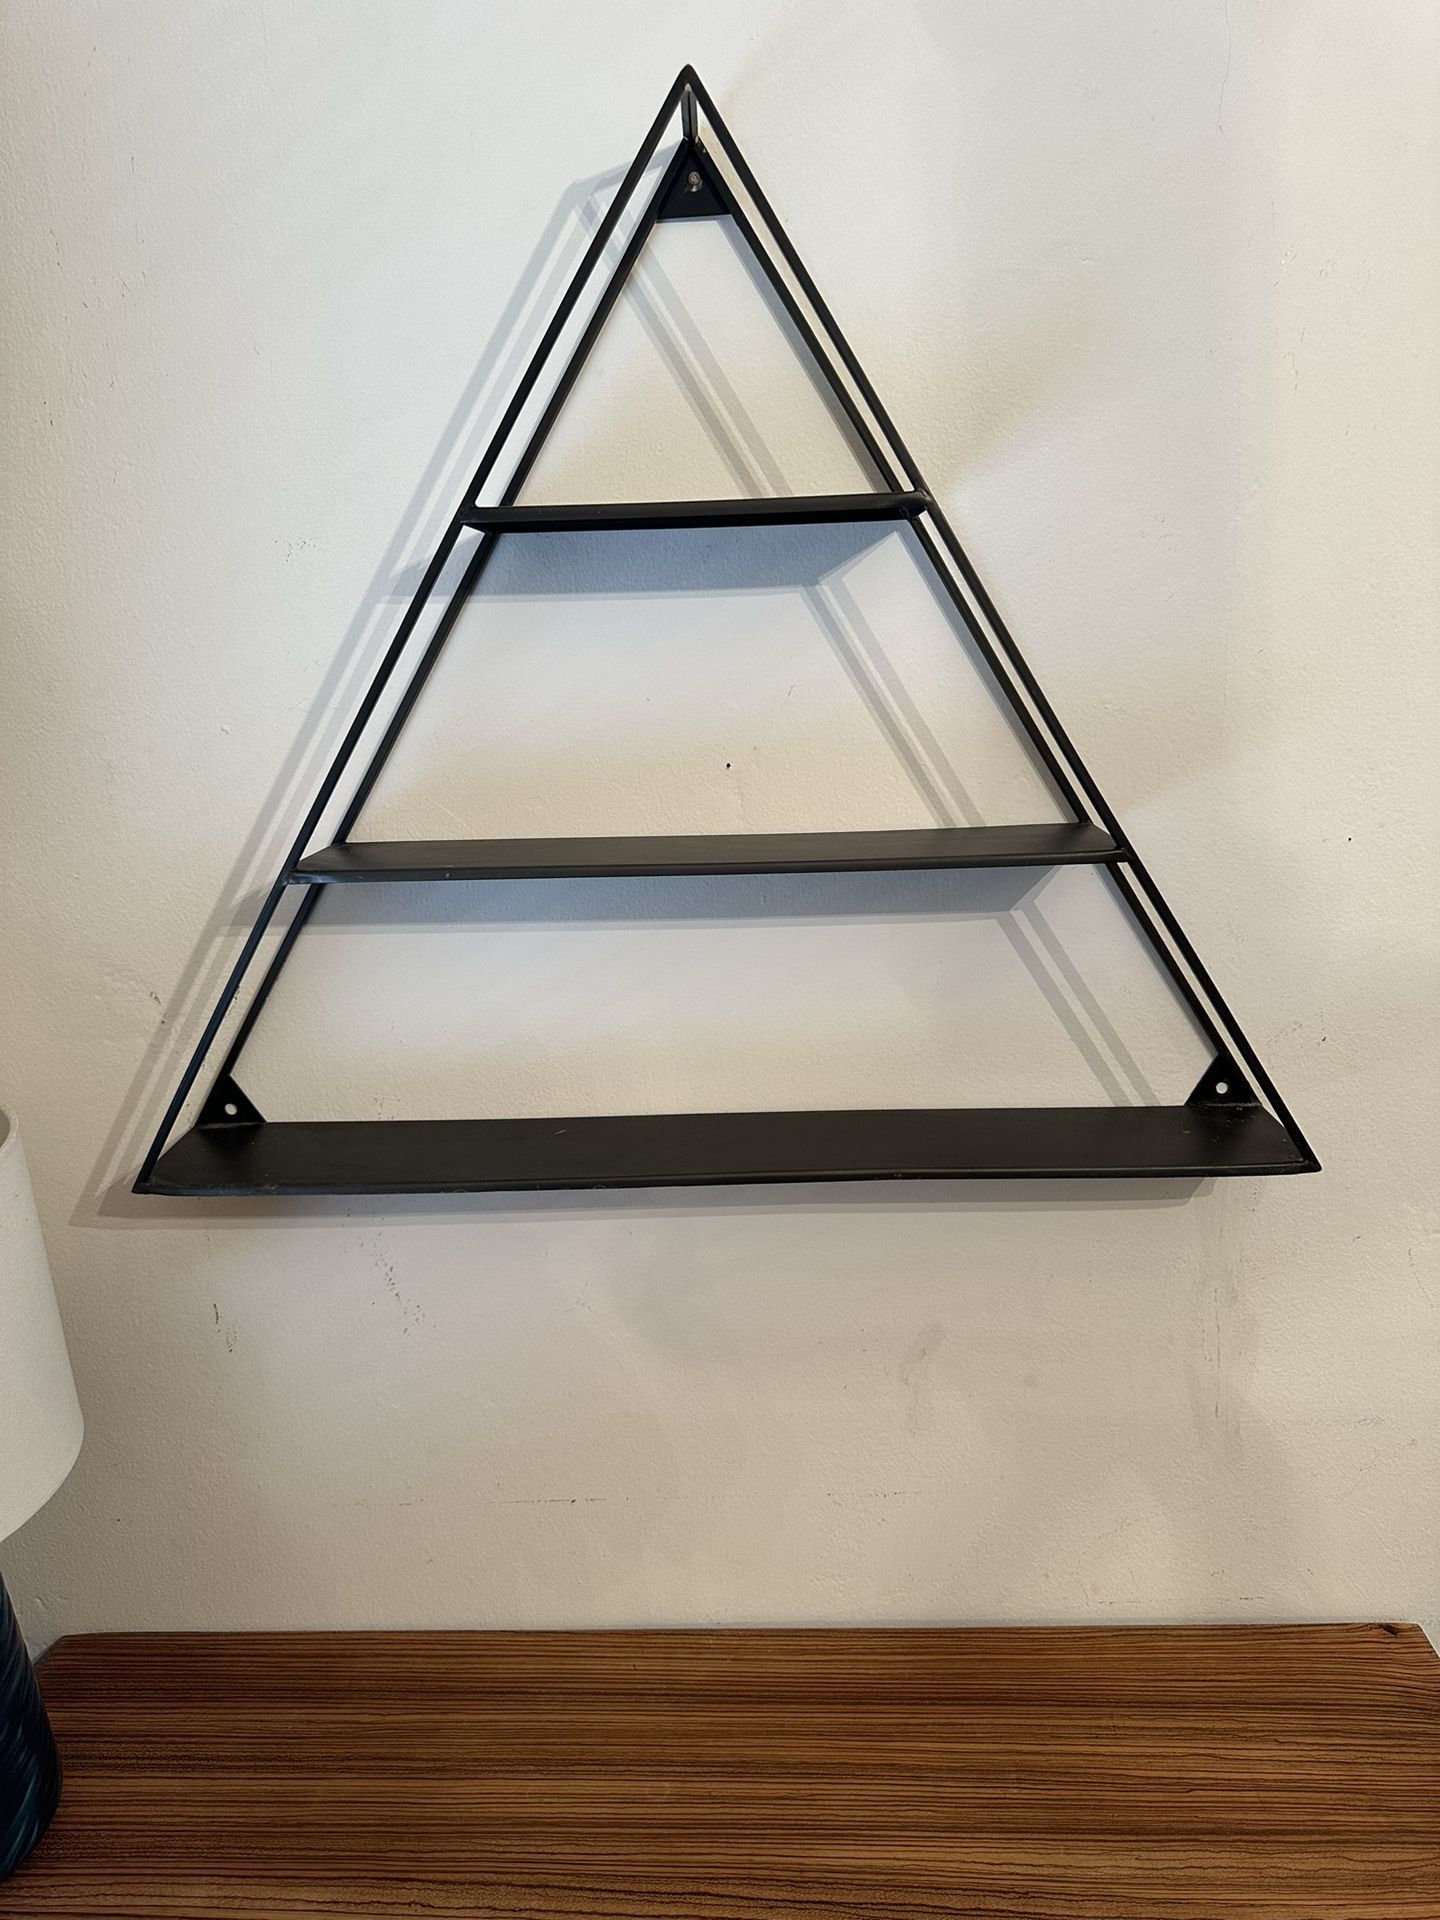 (Available If Listed ) Metal Triangle Shelf - Light Weight, Wall Mount. (combine With Other Items And Save!)